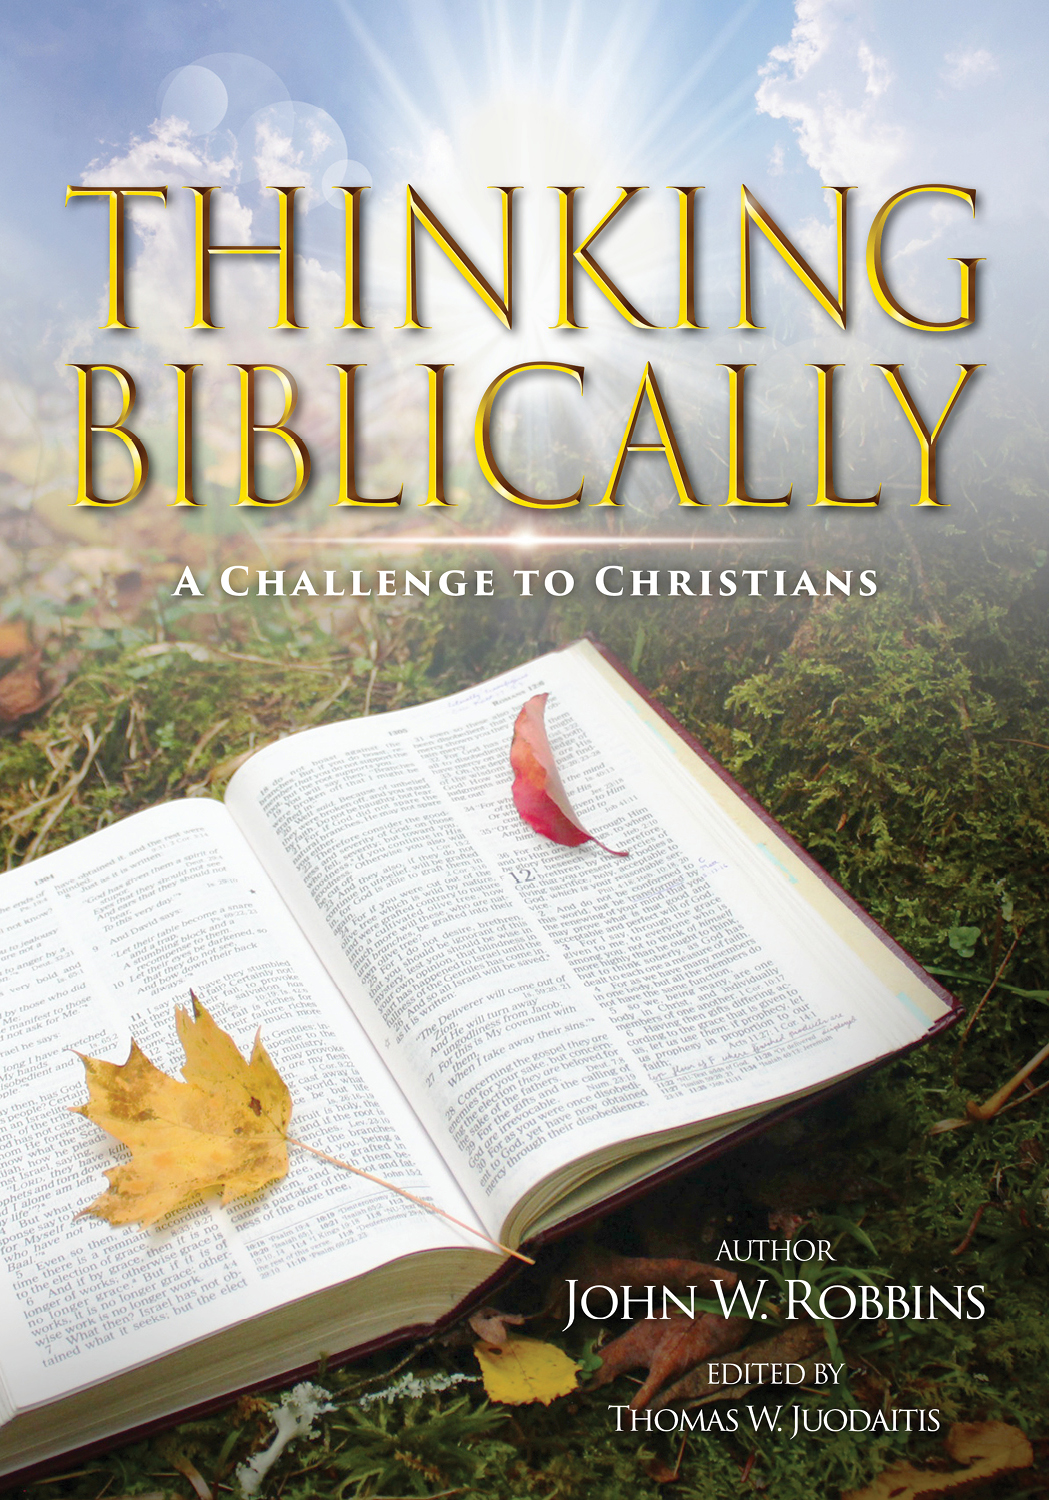 Thinking Biblically: A Challenge to Christians